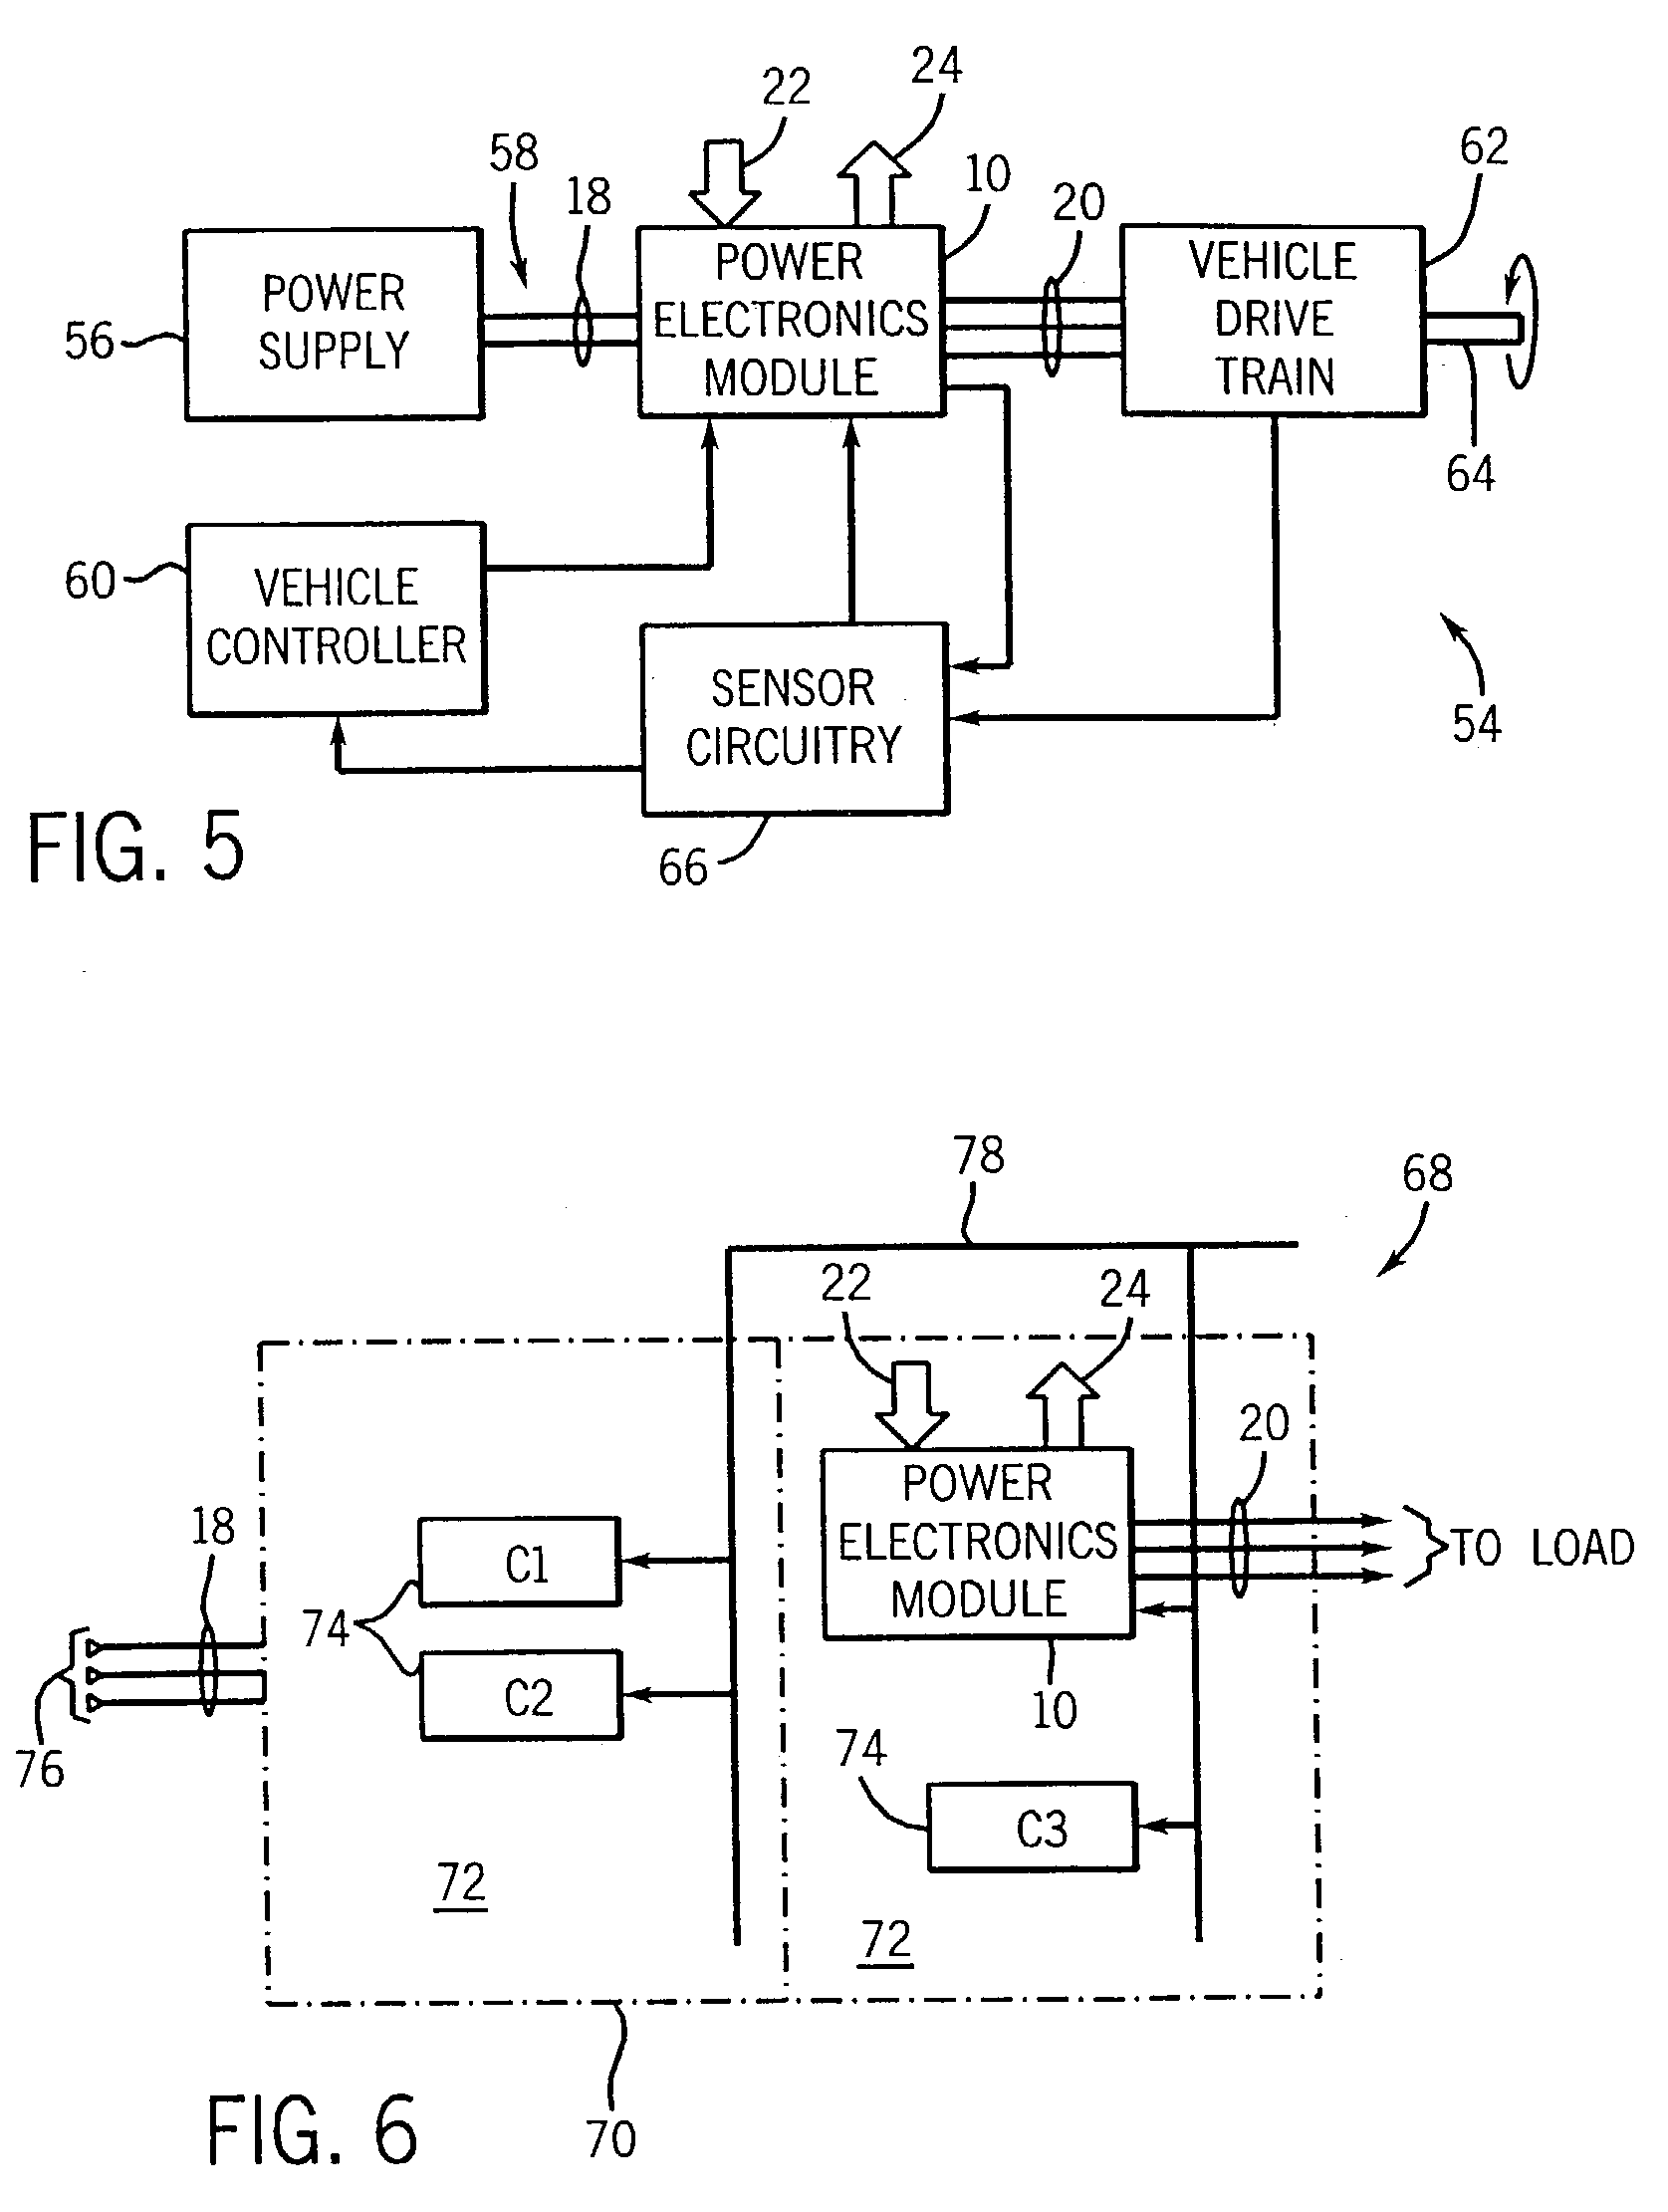 Vehicle drive module having improved cooling configuration